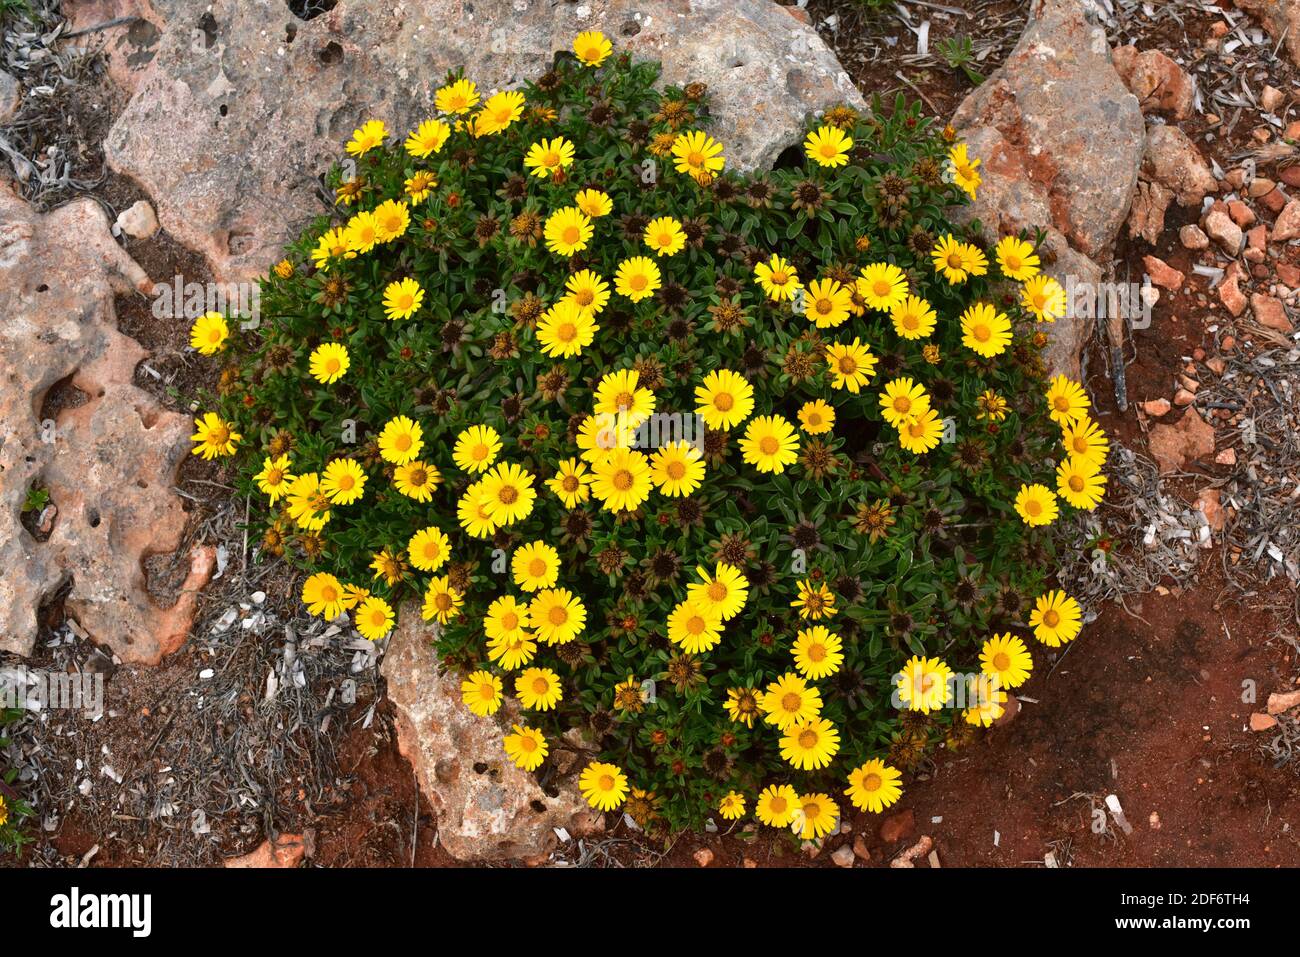 Gold coin daisy (Asteriscus maritimus or Pallenis maritima) is a perennial herb native to west Mediterranean coasts, Canary Islands and Greece. This Stock Photo